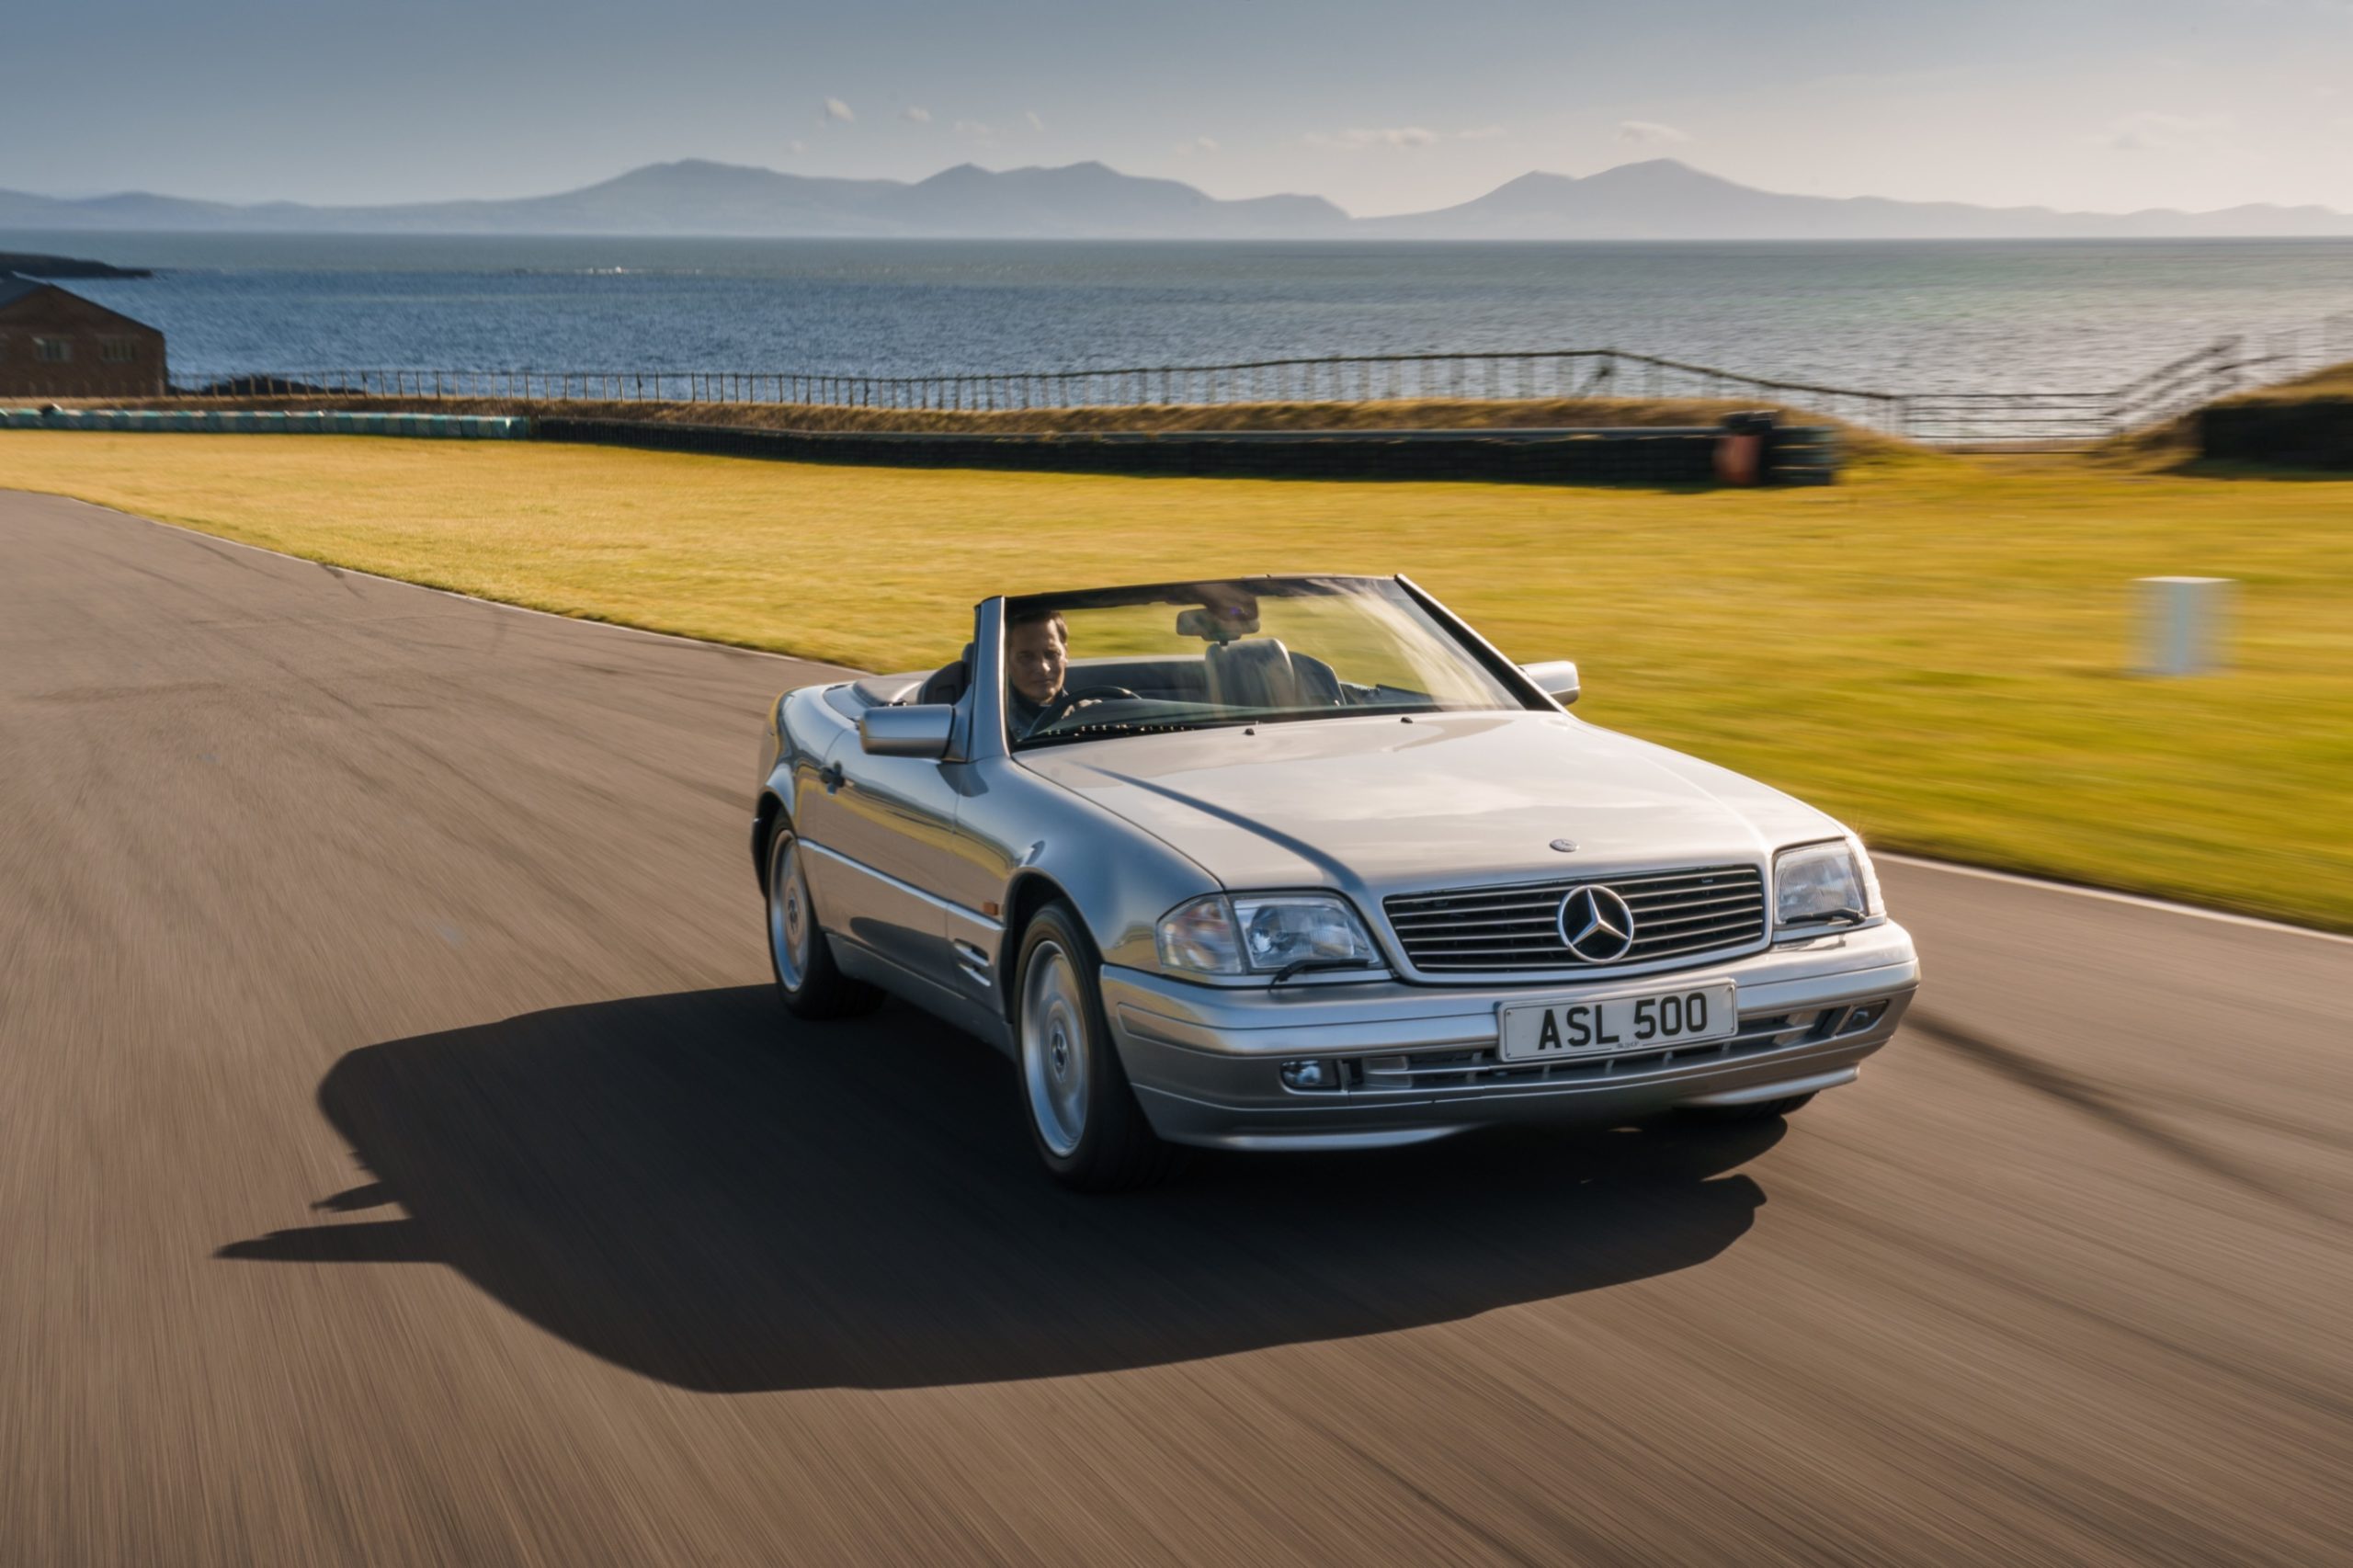 Mercedes SL500 driving around Anglesey Circuit.